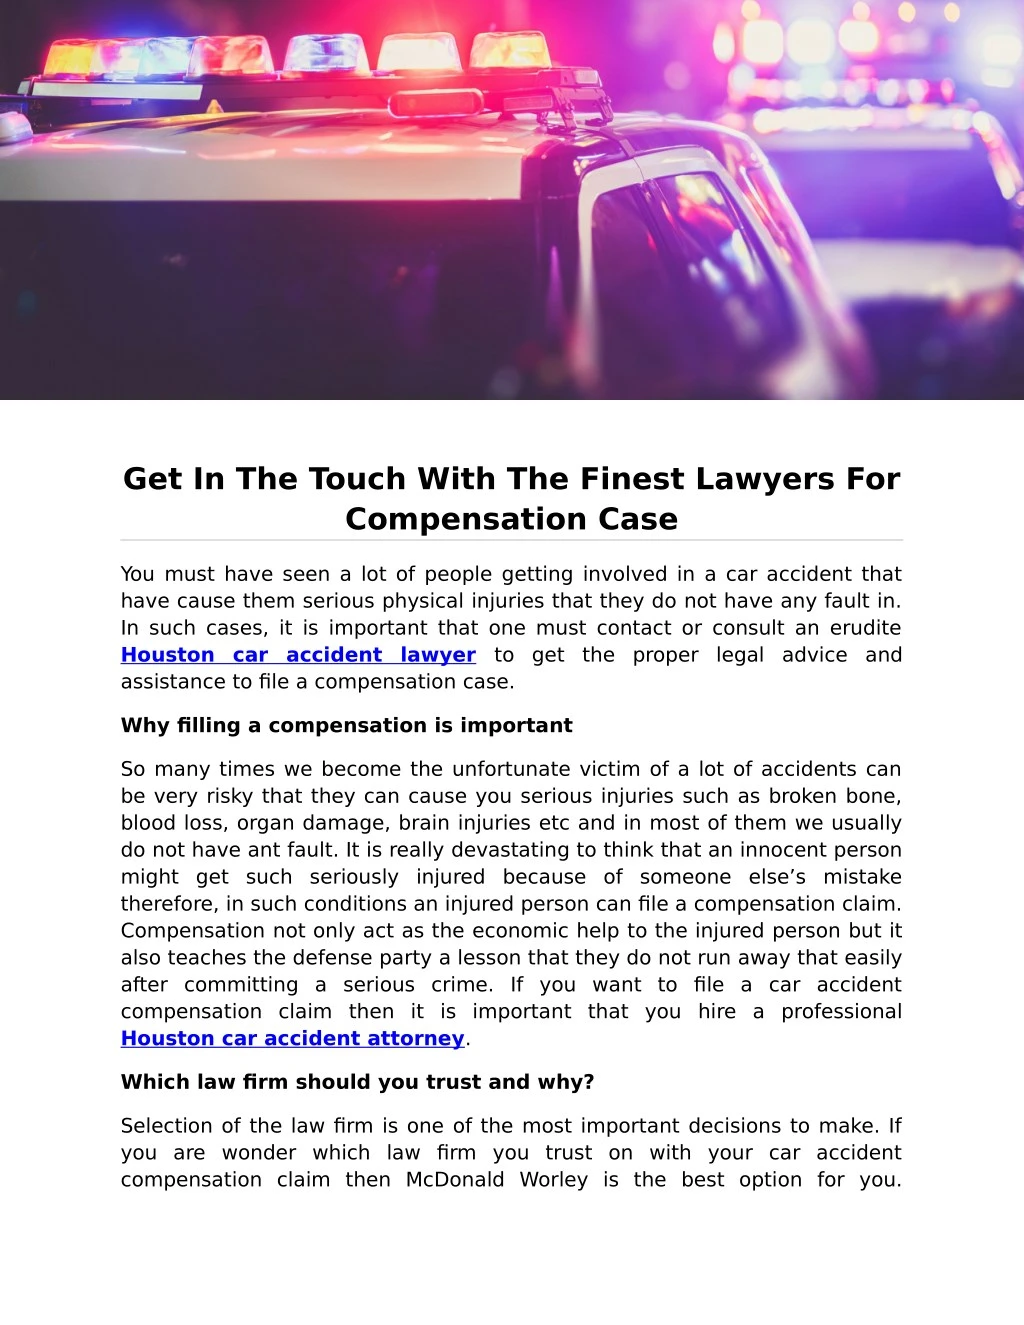 get in the touch with the finest lawyers